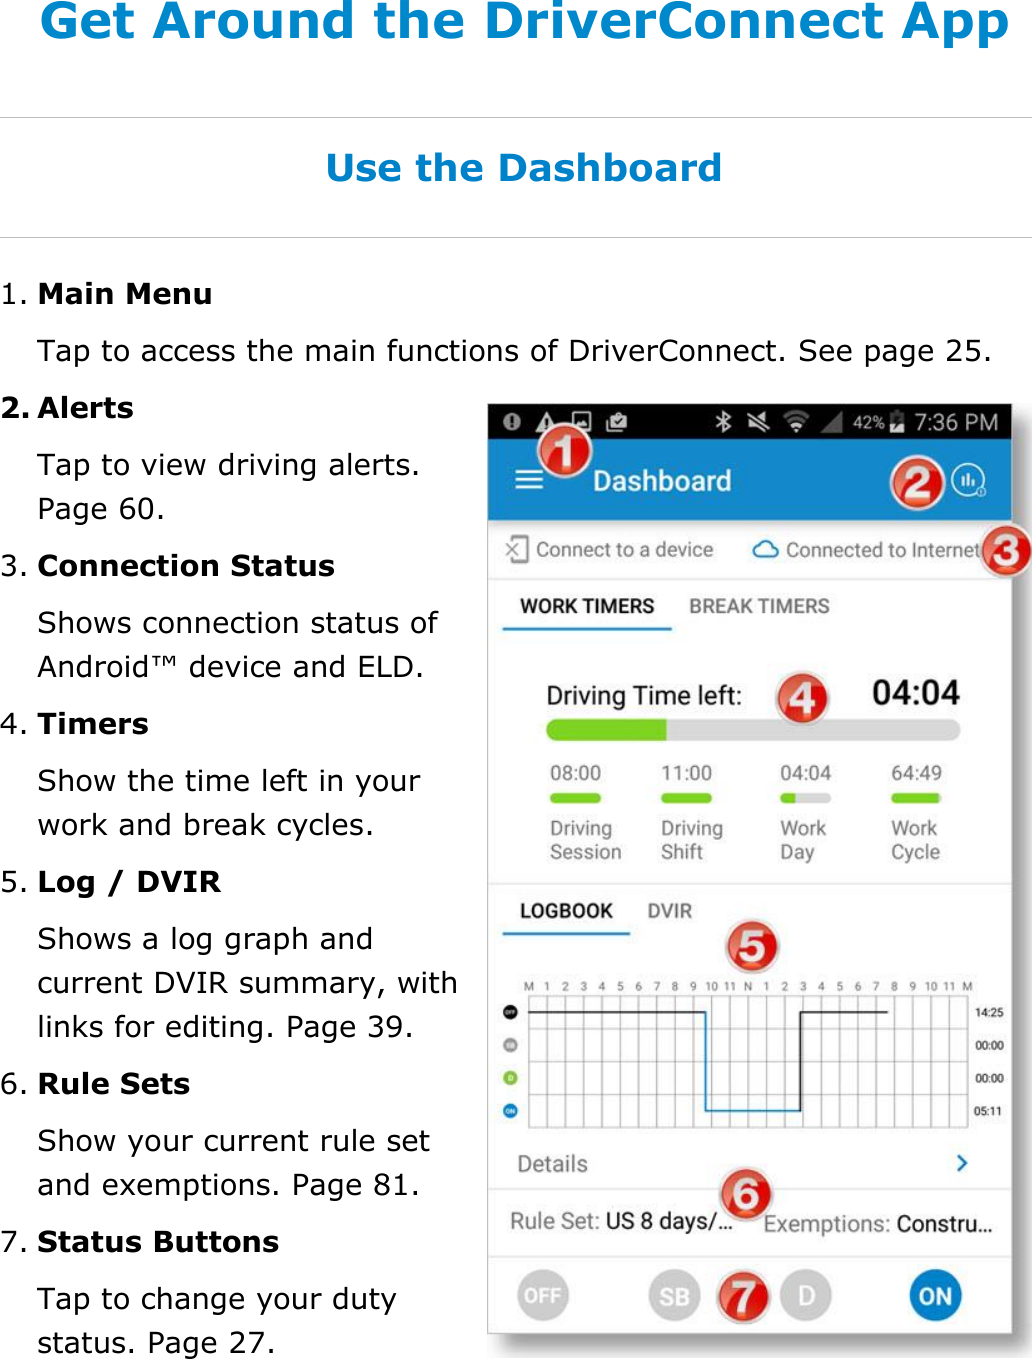 Set My Duty Status DriverConnect User Guide  20 © 2016-2017, Rand McNally, Inc. Get Around the DriverConnect App Use the Dashboard 1. Main Menu Tap to access the main functions of DriverConnect. See page 25. 2. Alerts Tap to view driving alerts. Page 60. 3. Connection Status Shows connection status of Android™ device and ELD. 4. Timers Show the time left in your work and break cycles. 5. Log / DVIR Shows a log graph and current DVIR summary, with links for editing. Page 39. 6. Rule Sets Show your current rule set and exemptions. Page 81. 7. Status Buttons Tap to change your duty status. Page 27.   